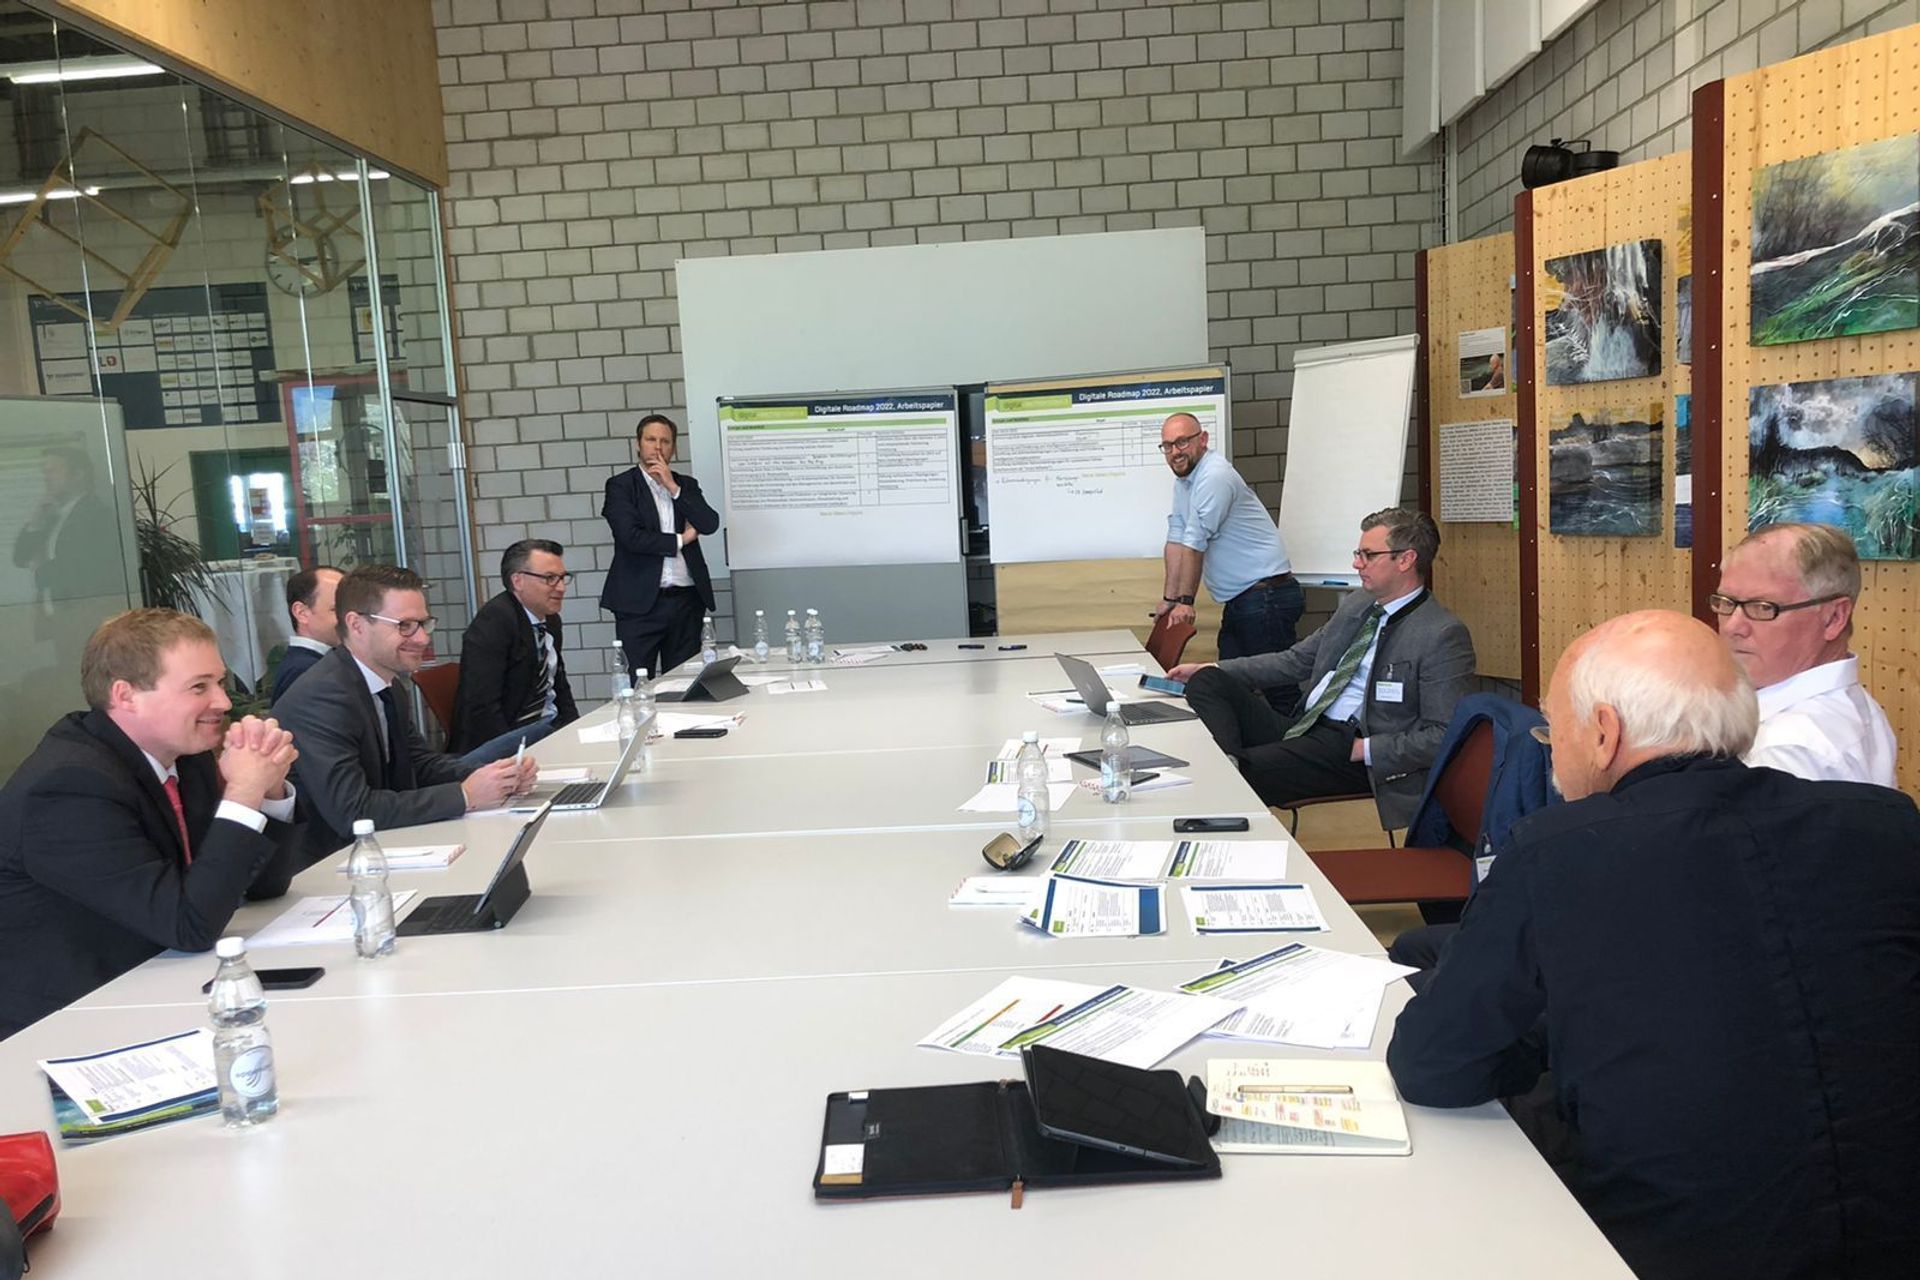 The workshop of the thirty board members of the digital-liechtenstein.li initiative at the Technopark in Vaduz, aimed at reviewing the 2019 "Digital Roadmap"